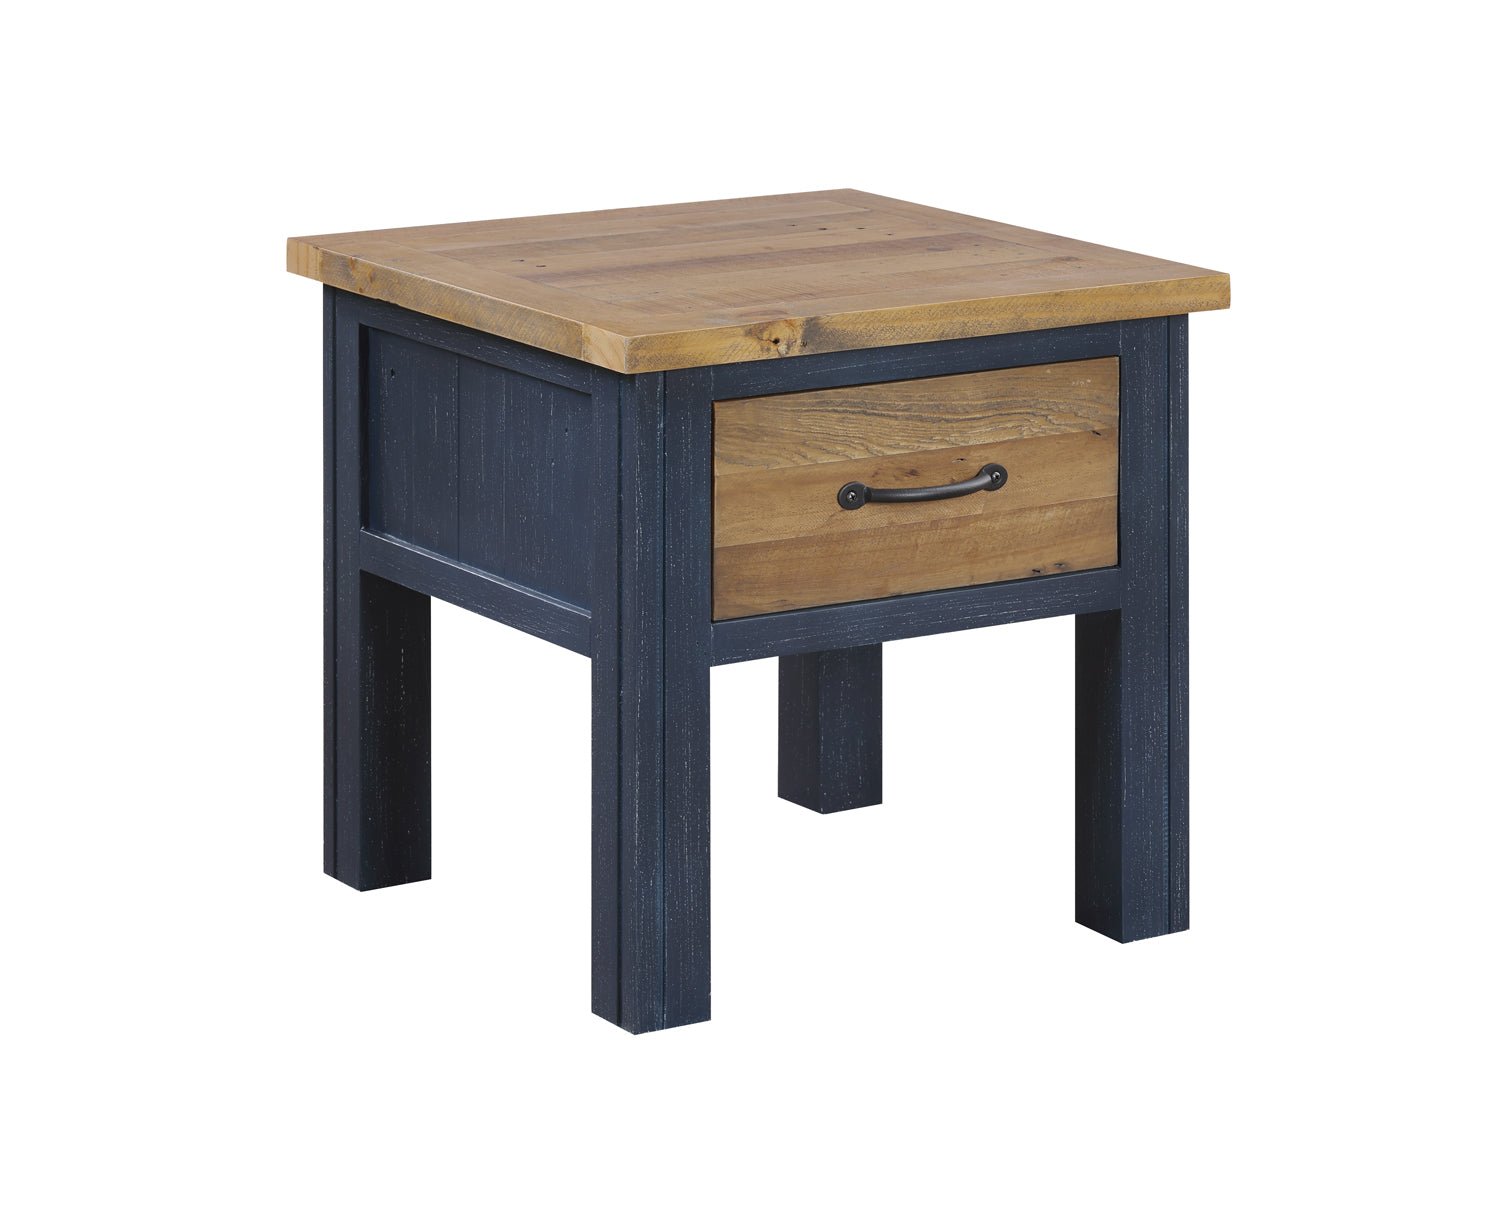 Splash of Blue Lamp Table With drawer - Duck Barn Interiors